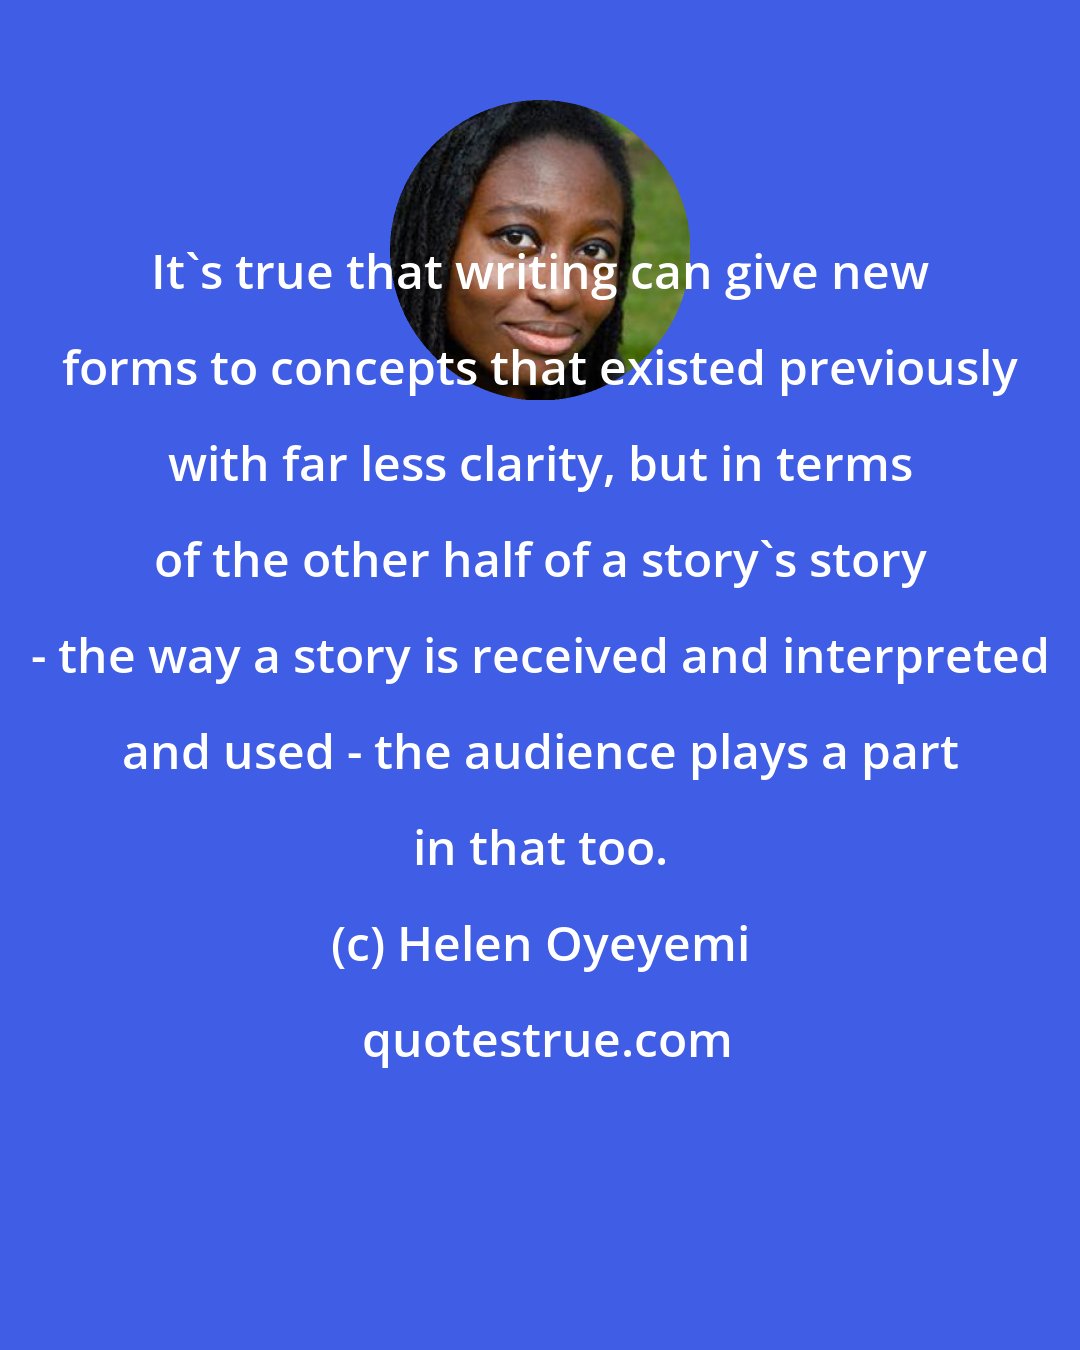 Helen Oyeyemi: It's true that writing can give new forms to concepts that existed previously with far less clarity, but in terms of the other half of a story's story - the way a story is received and interpreted and used - the audience plays a part in that too.